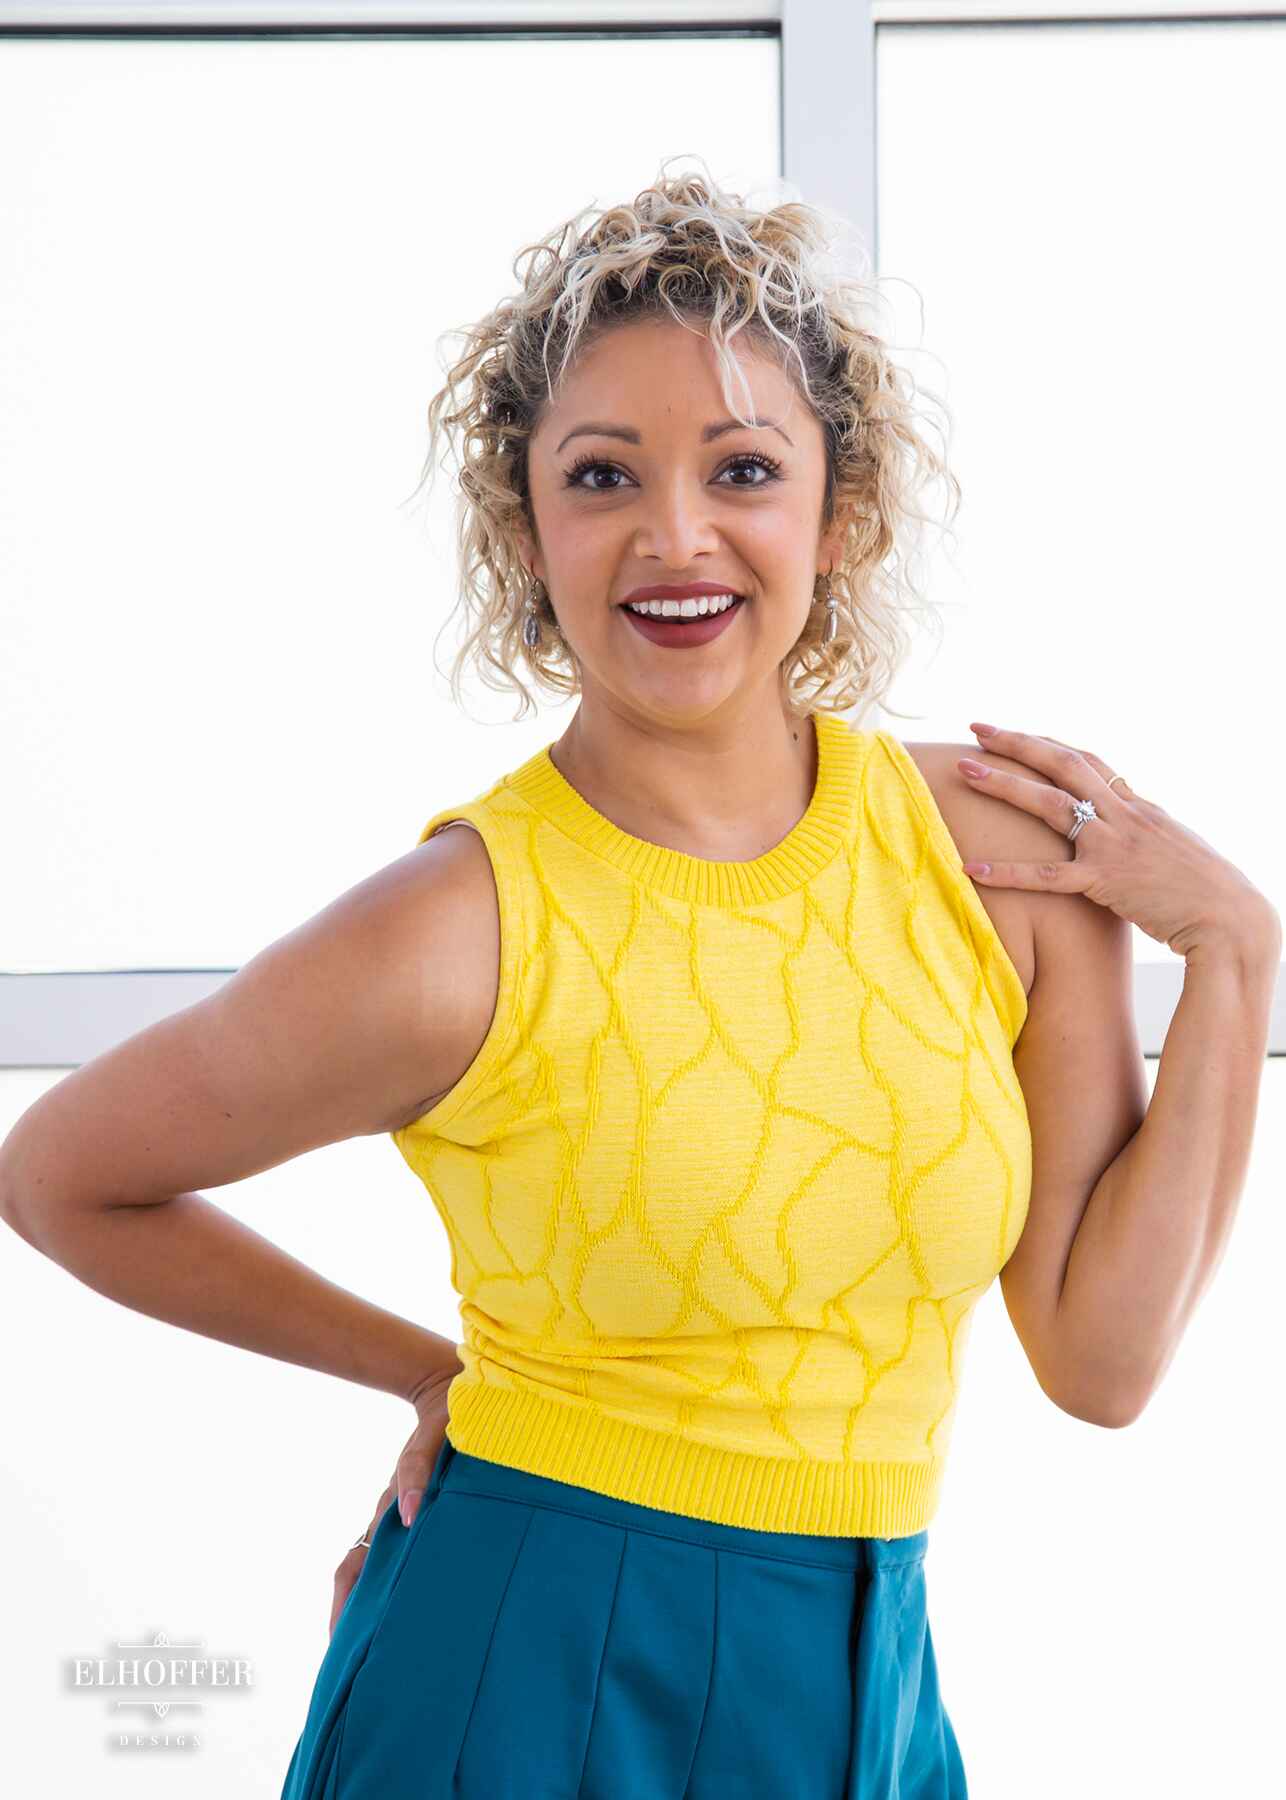 Simone, a light olive skinned S model with short curly platinum blonde hair, is smiling while wearing a bright yellow sleeveless knit crop top with a butterfly wing textured pattern. She paired the crop top with peacock teal trousers.